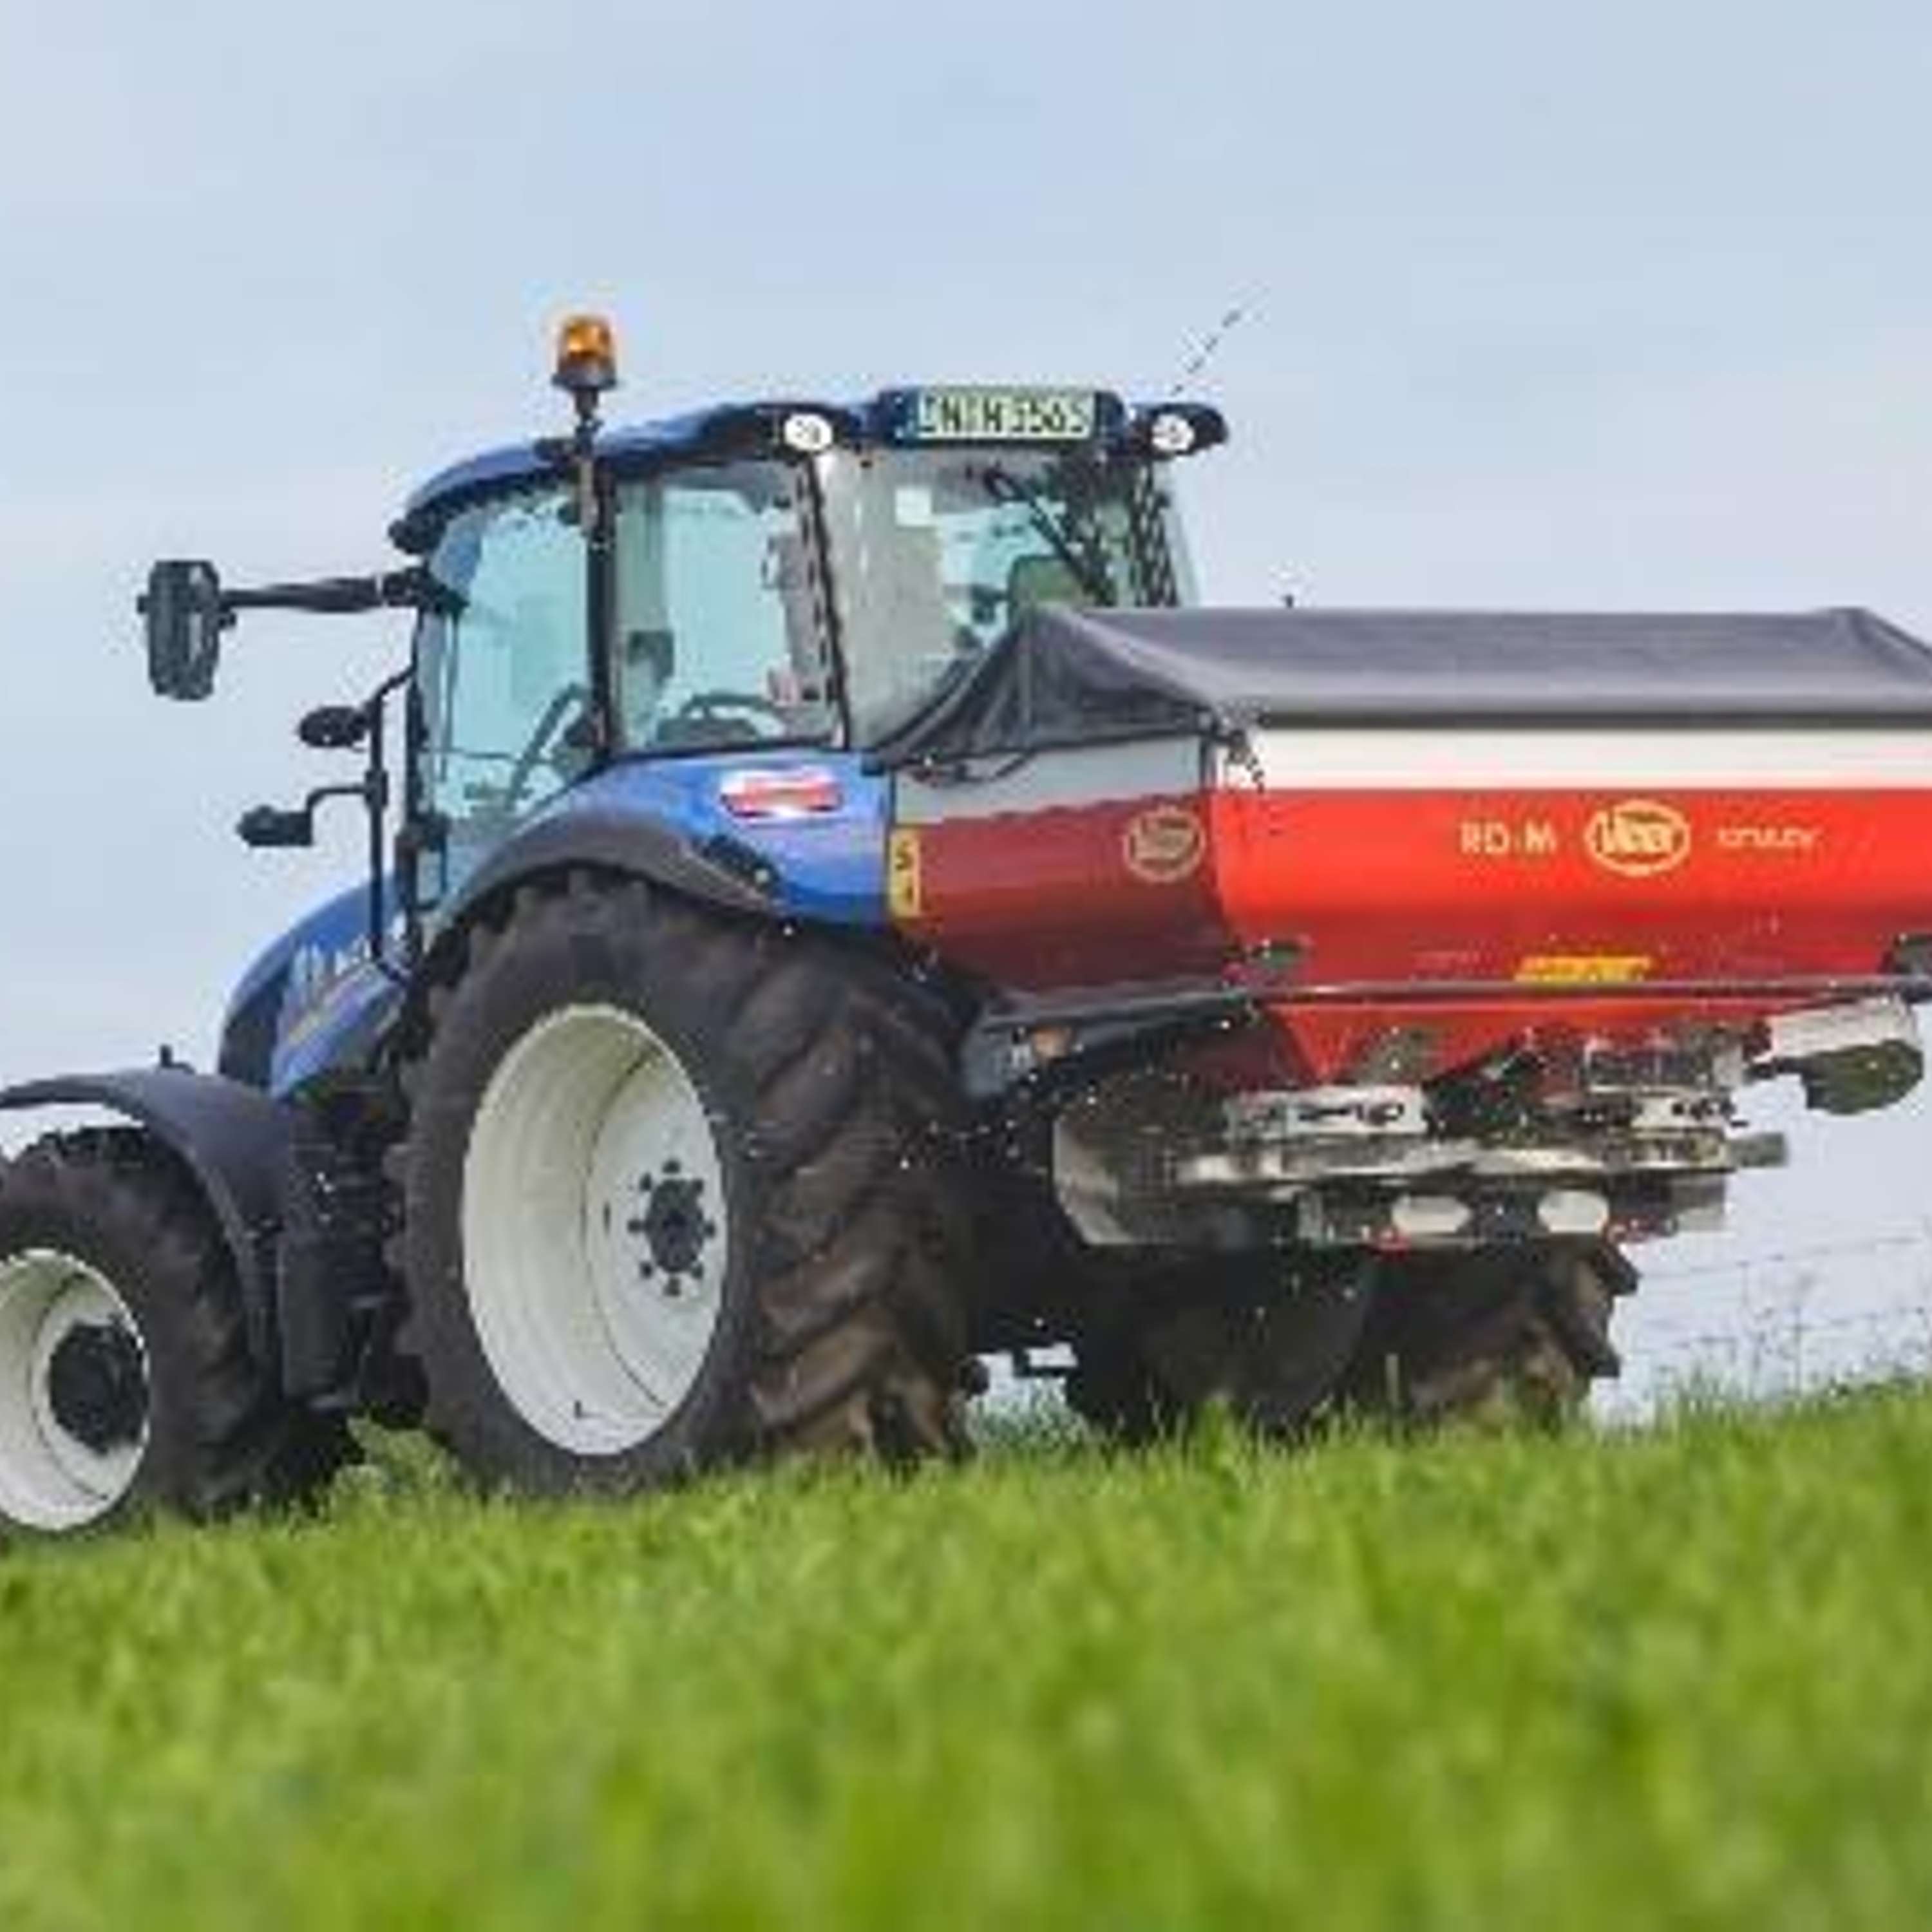 Closing up silage ground - the key things to consider